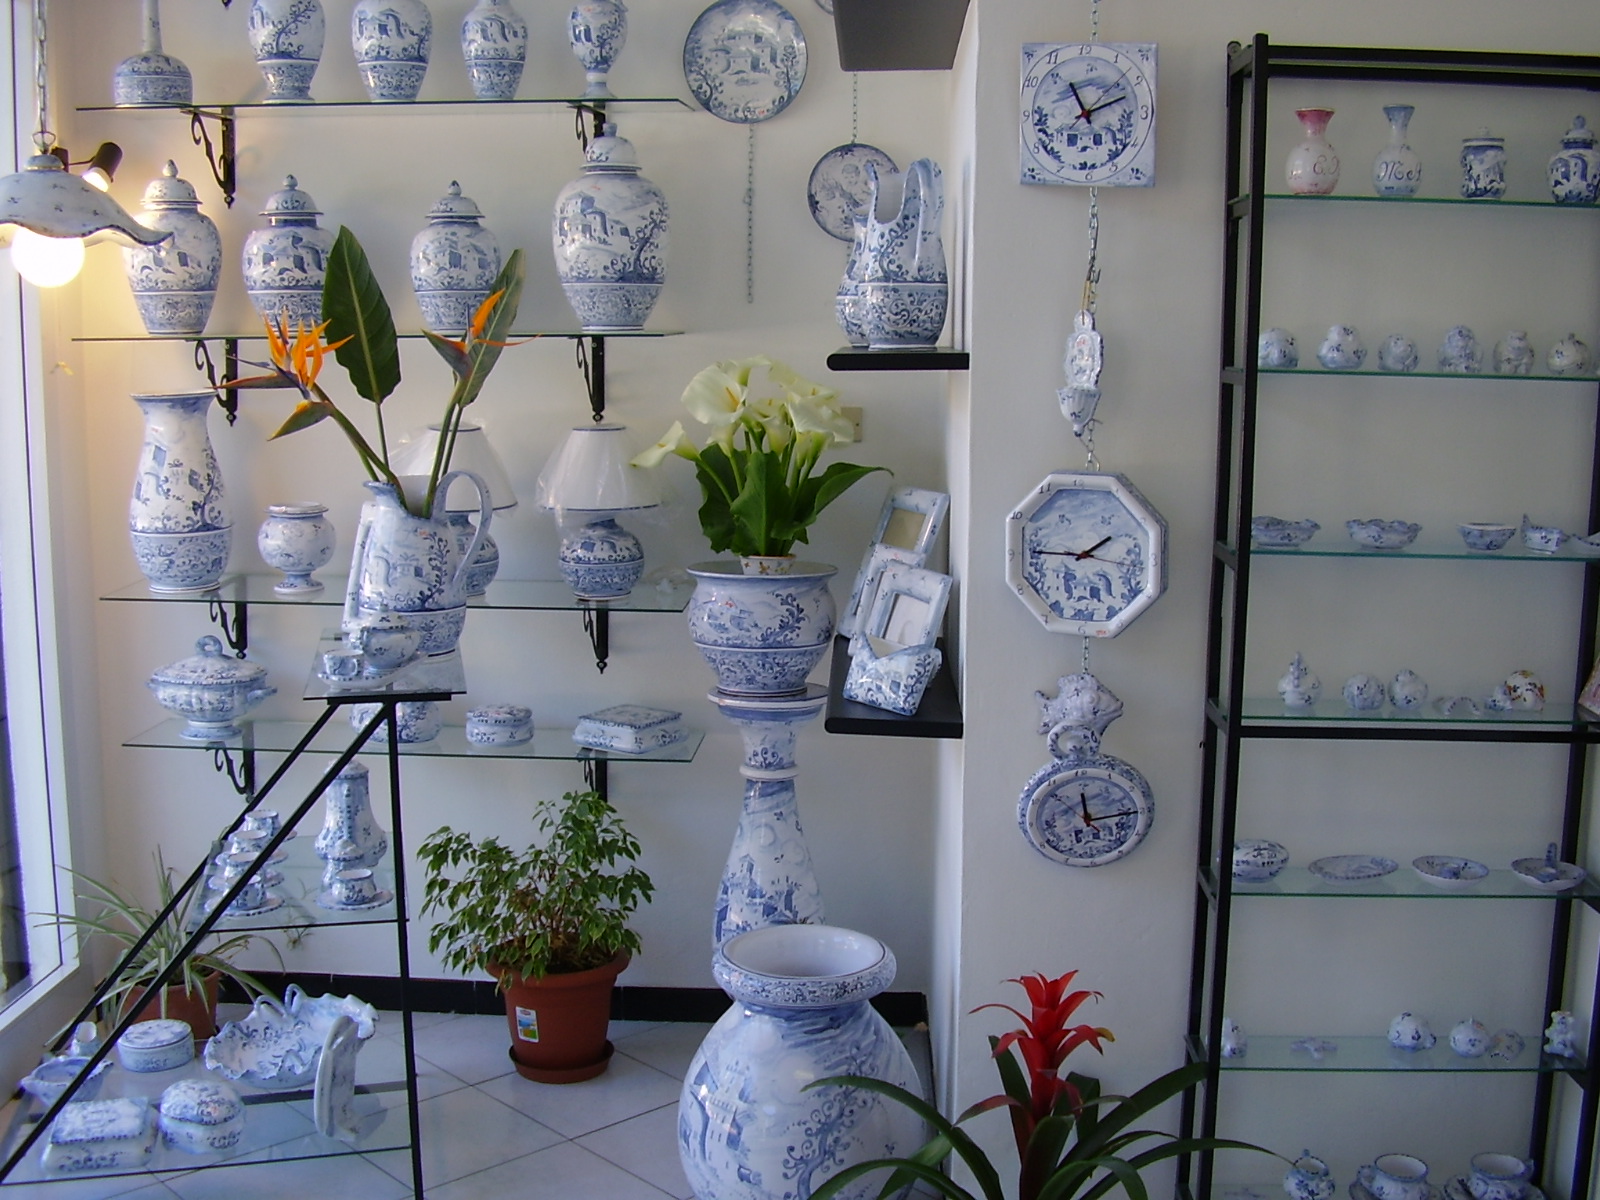 All kinds of pottery with decorations of your choice.